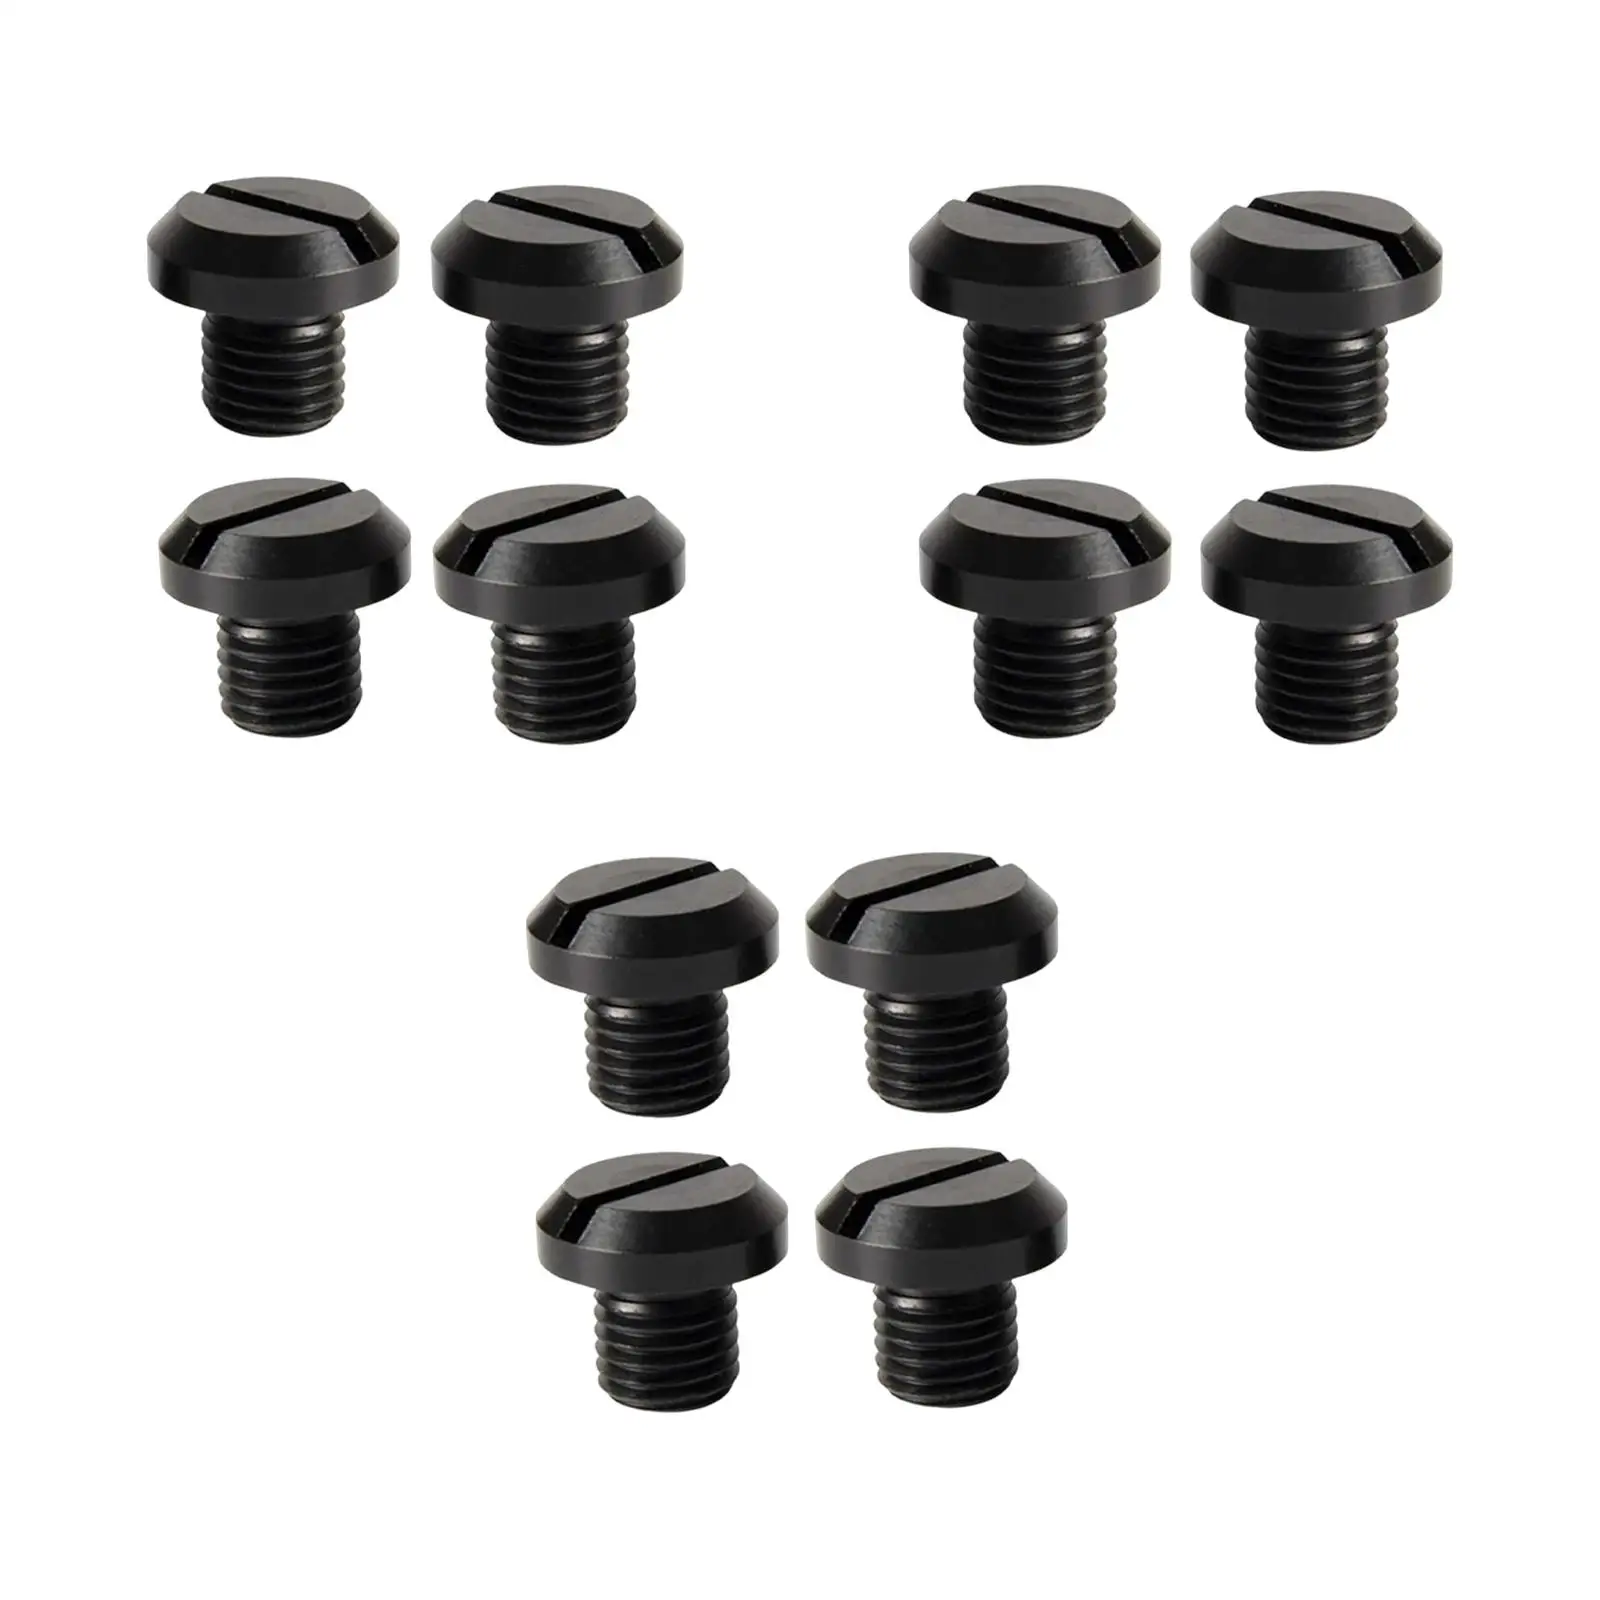 4x Motorcycle Rearview Mirror plug Screw Bolts CNC Metal Decoration